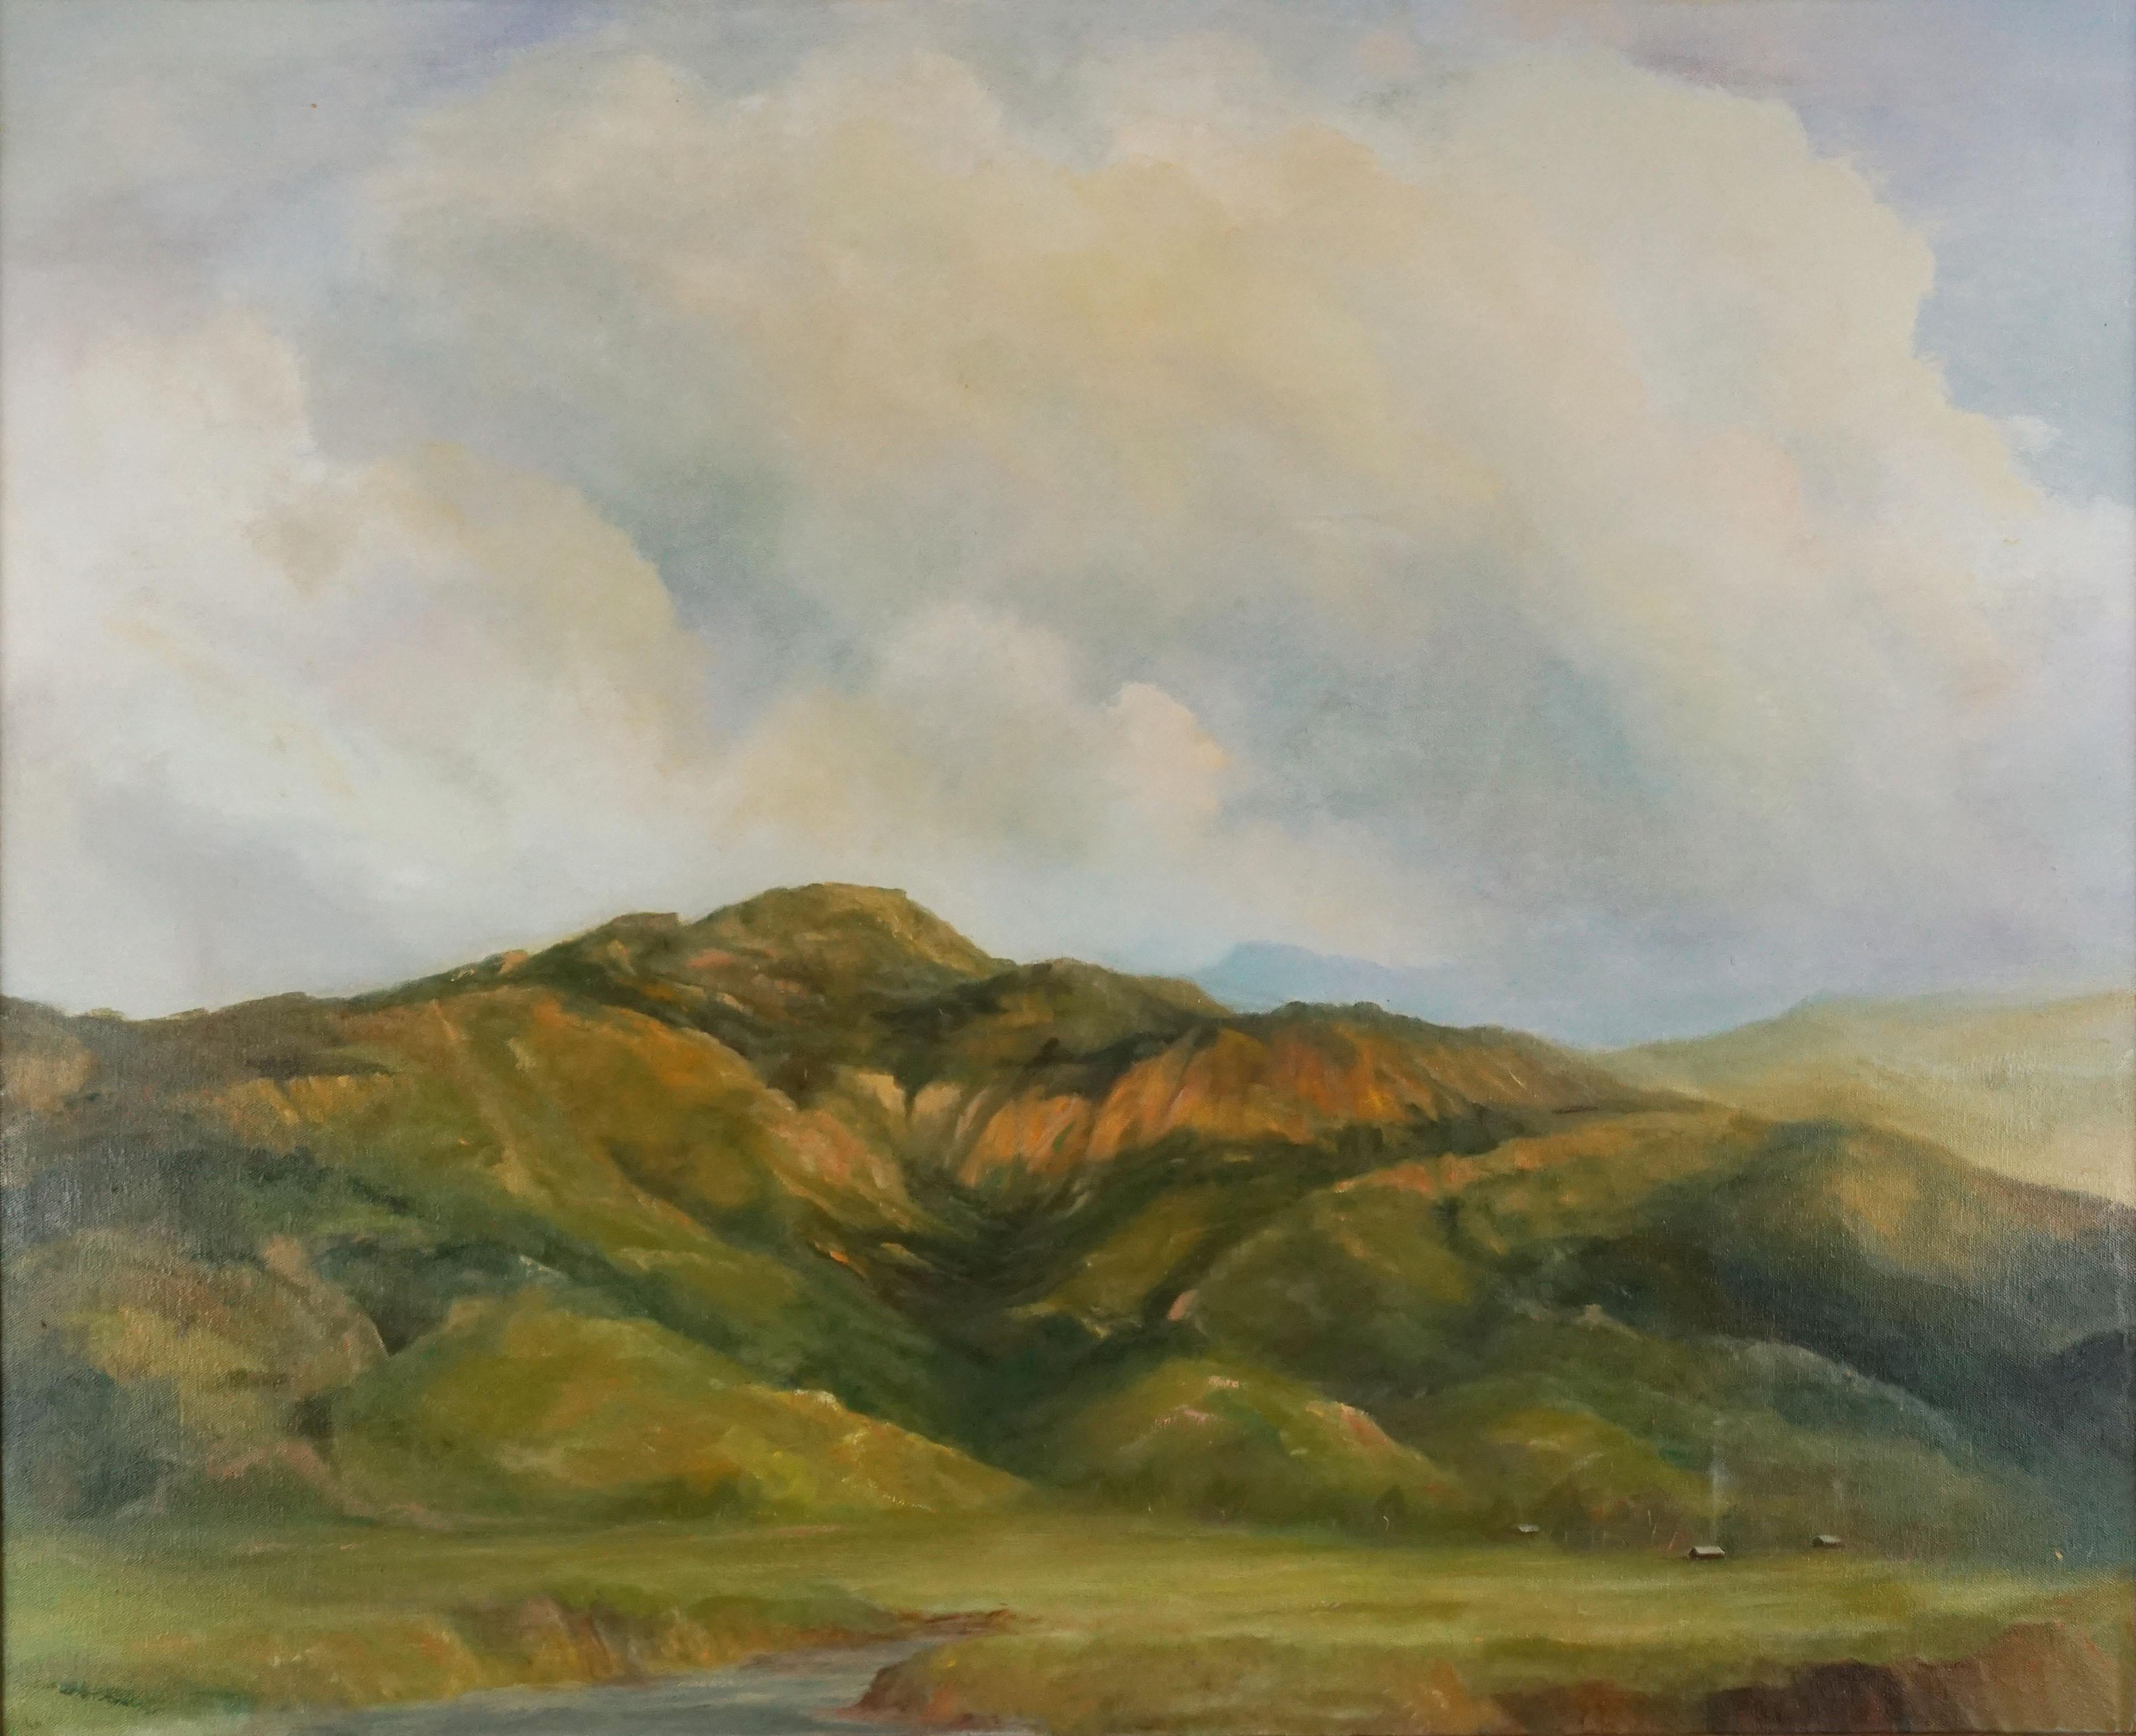 California Central Coast Foothills Landscape - Painting by Kenneth Lucas